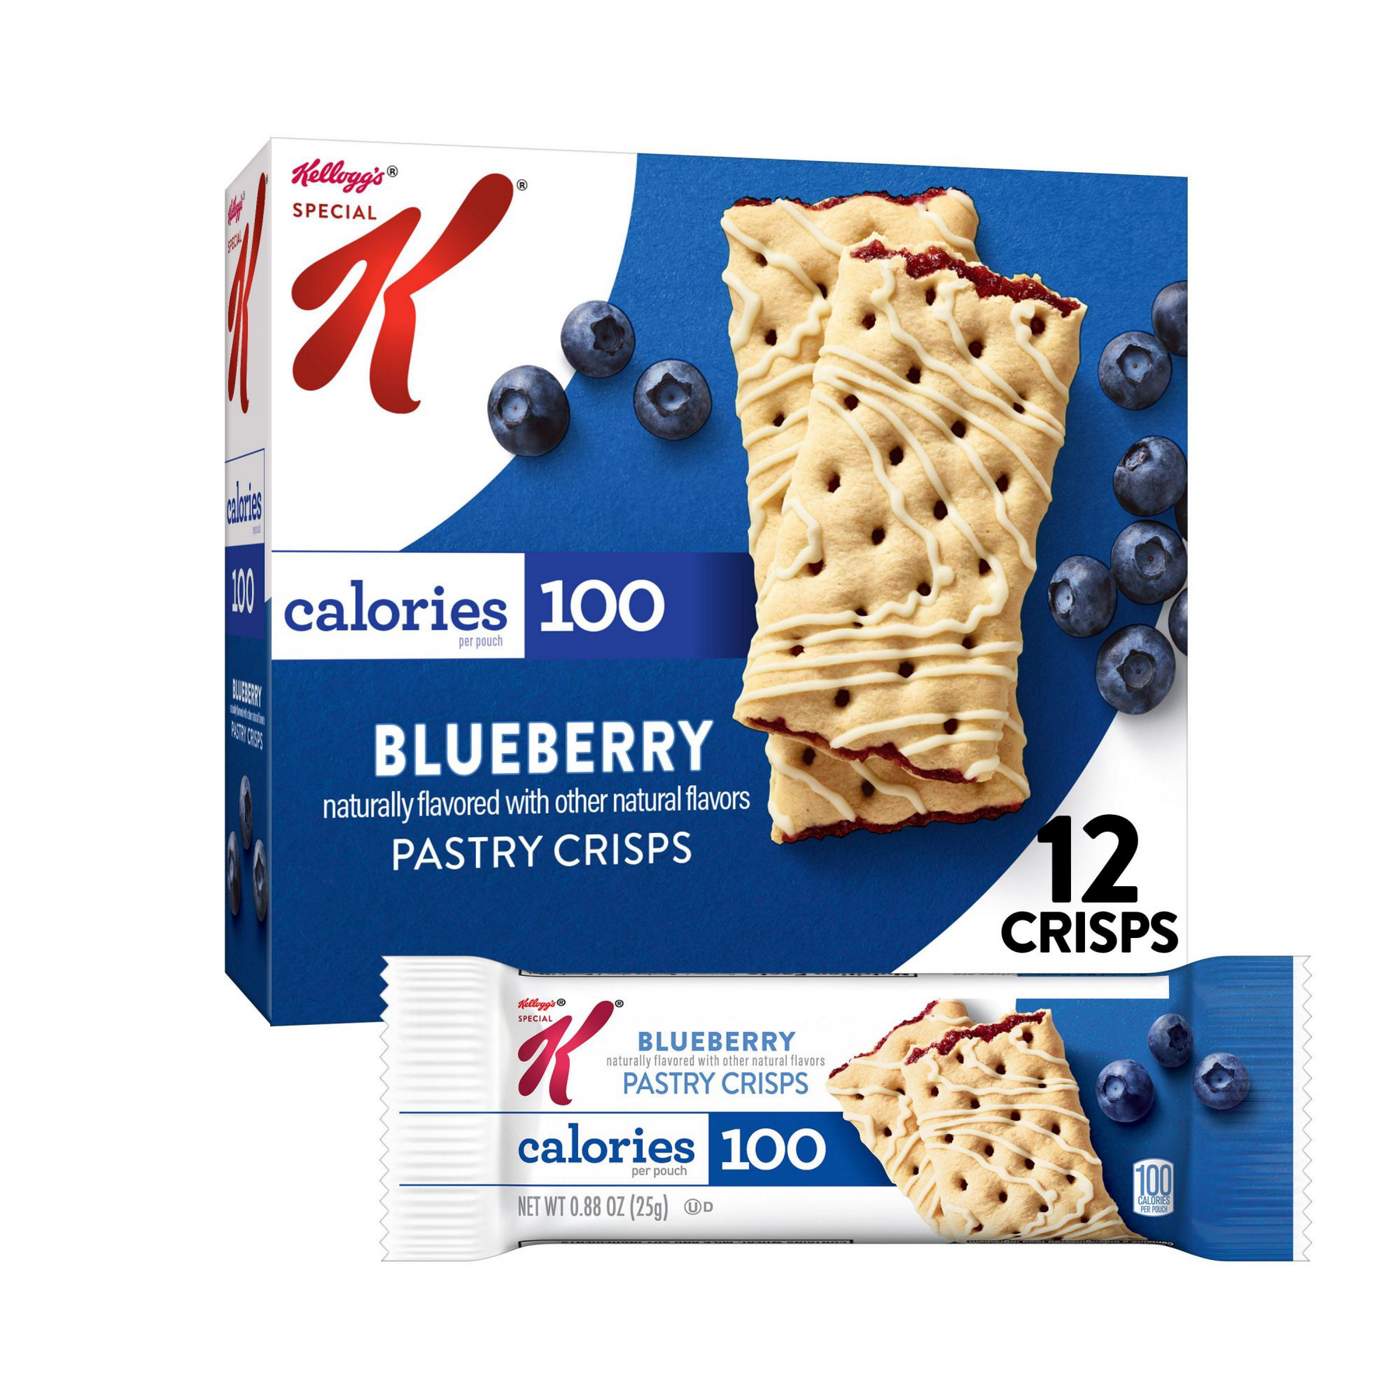 Kellogg's Special K Blueberry Pastry Crisps; image 3 of 4